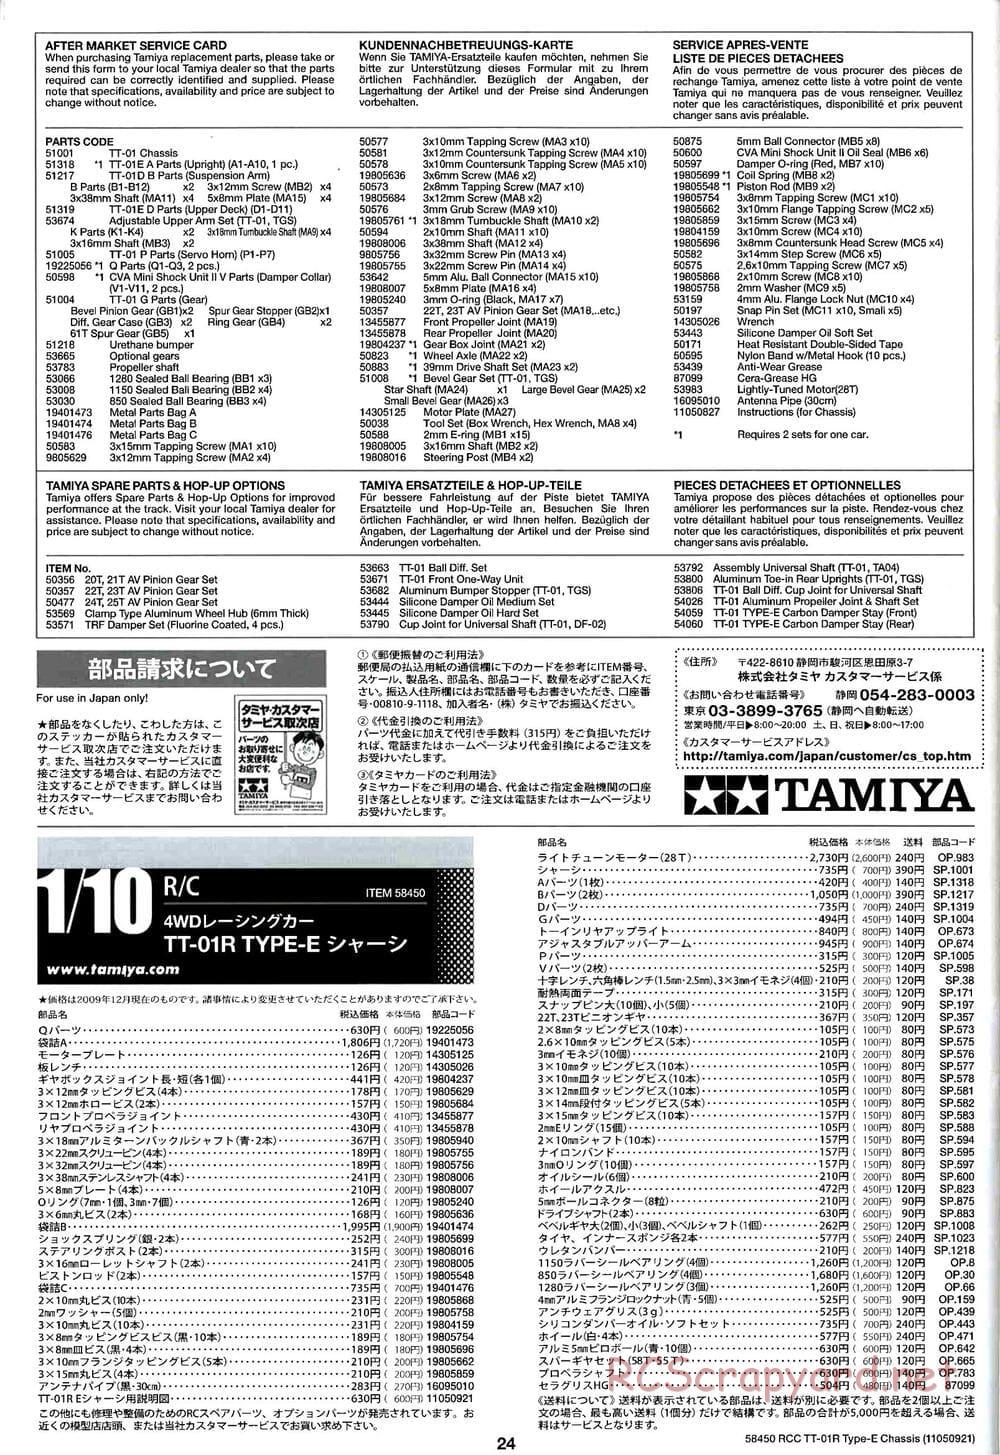 Tamiya - TT-01R Type-E Chassis - Manual - Page 24